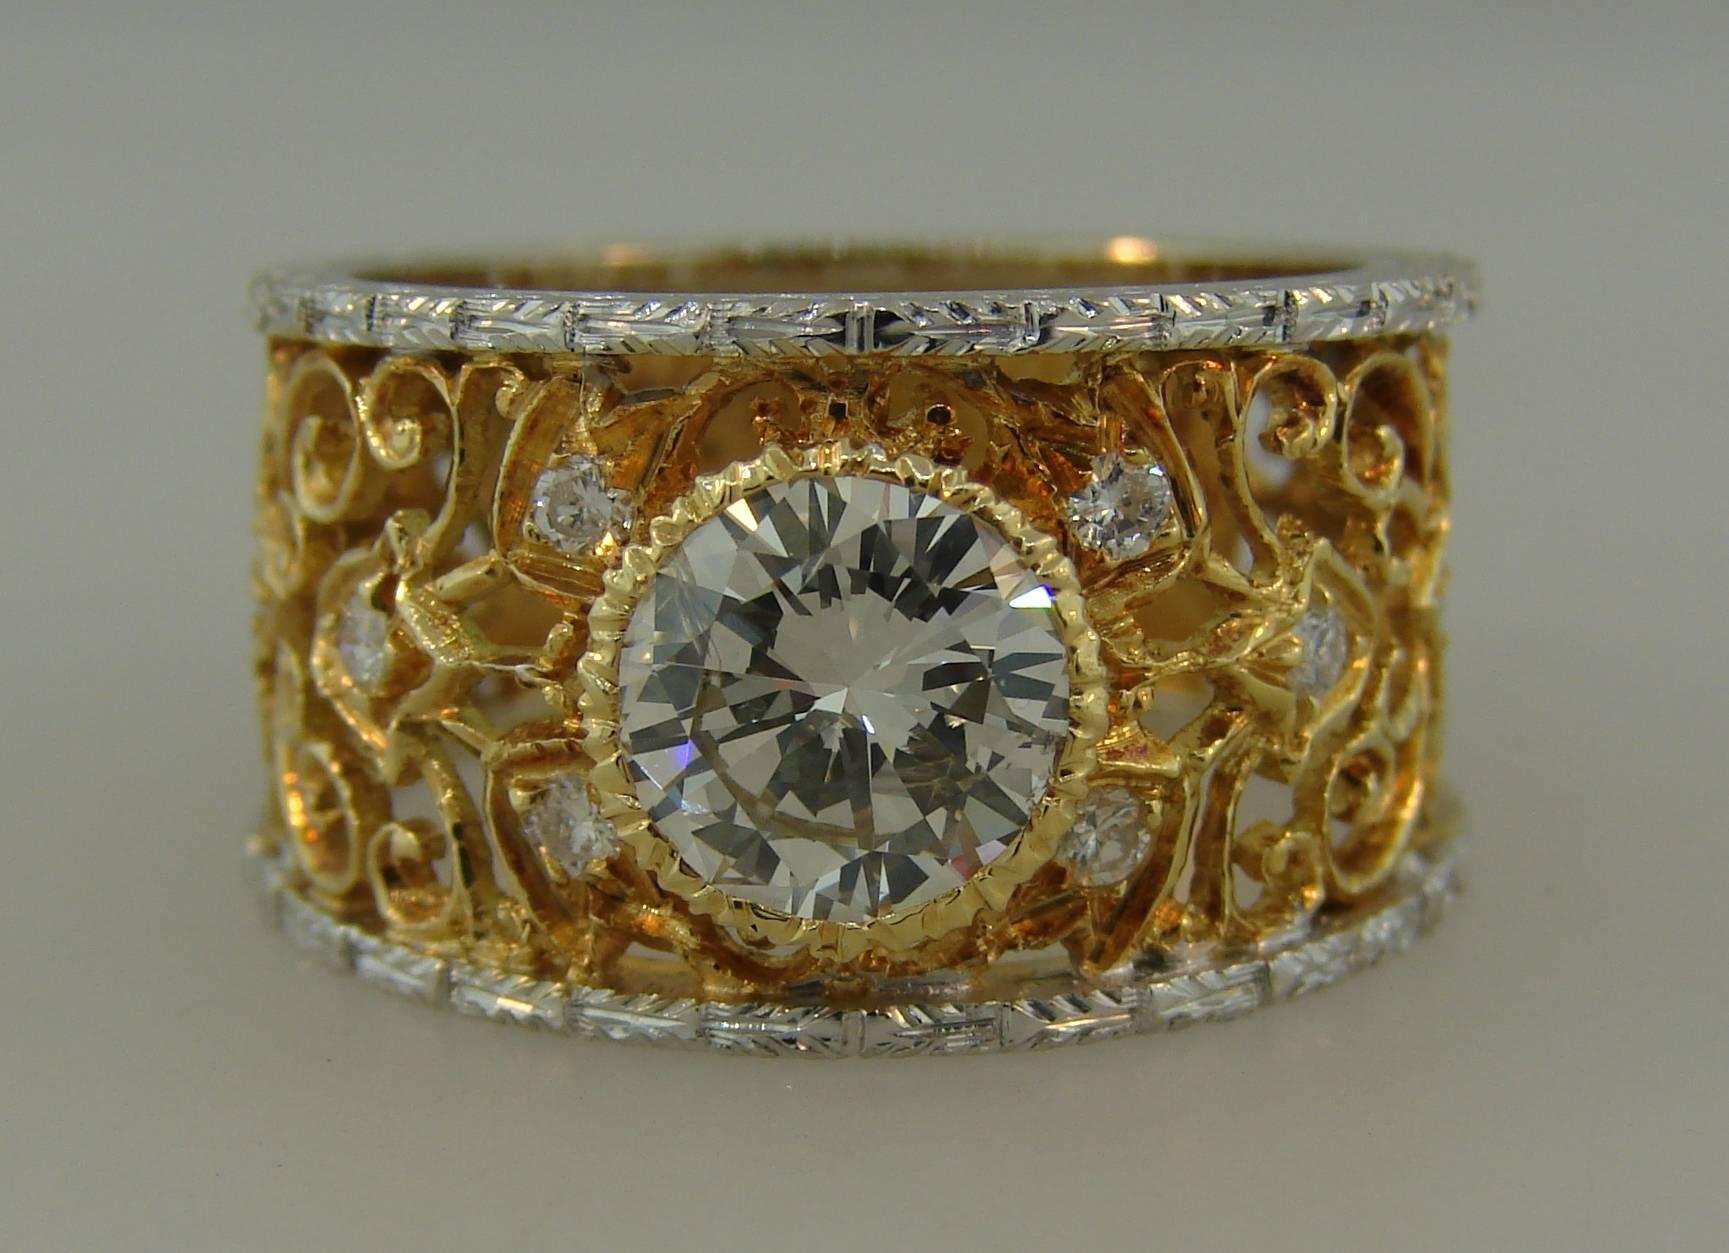 Stunning signature Mario Buccellati lacy band created in Italy in the 1960's. It features an approximately 1.52-carat round brilliant cut diamond framed in 18 karat openwork two-tone gold sprinkled with eight round diamonds. This lacy design is very